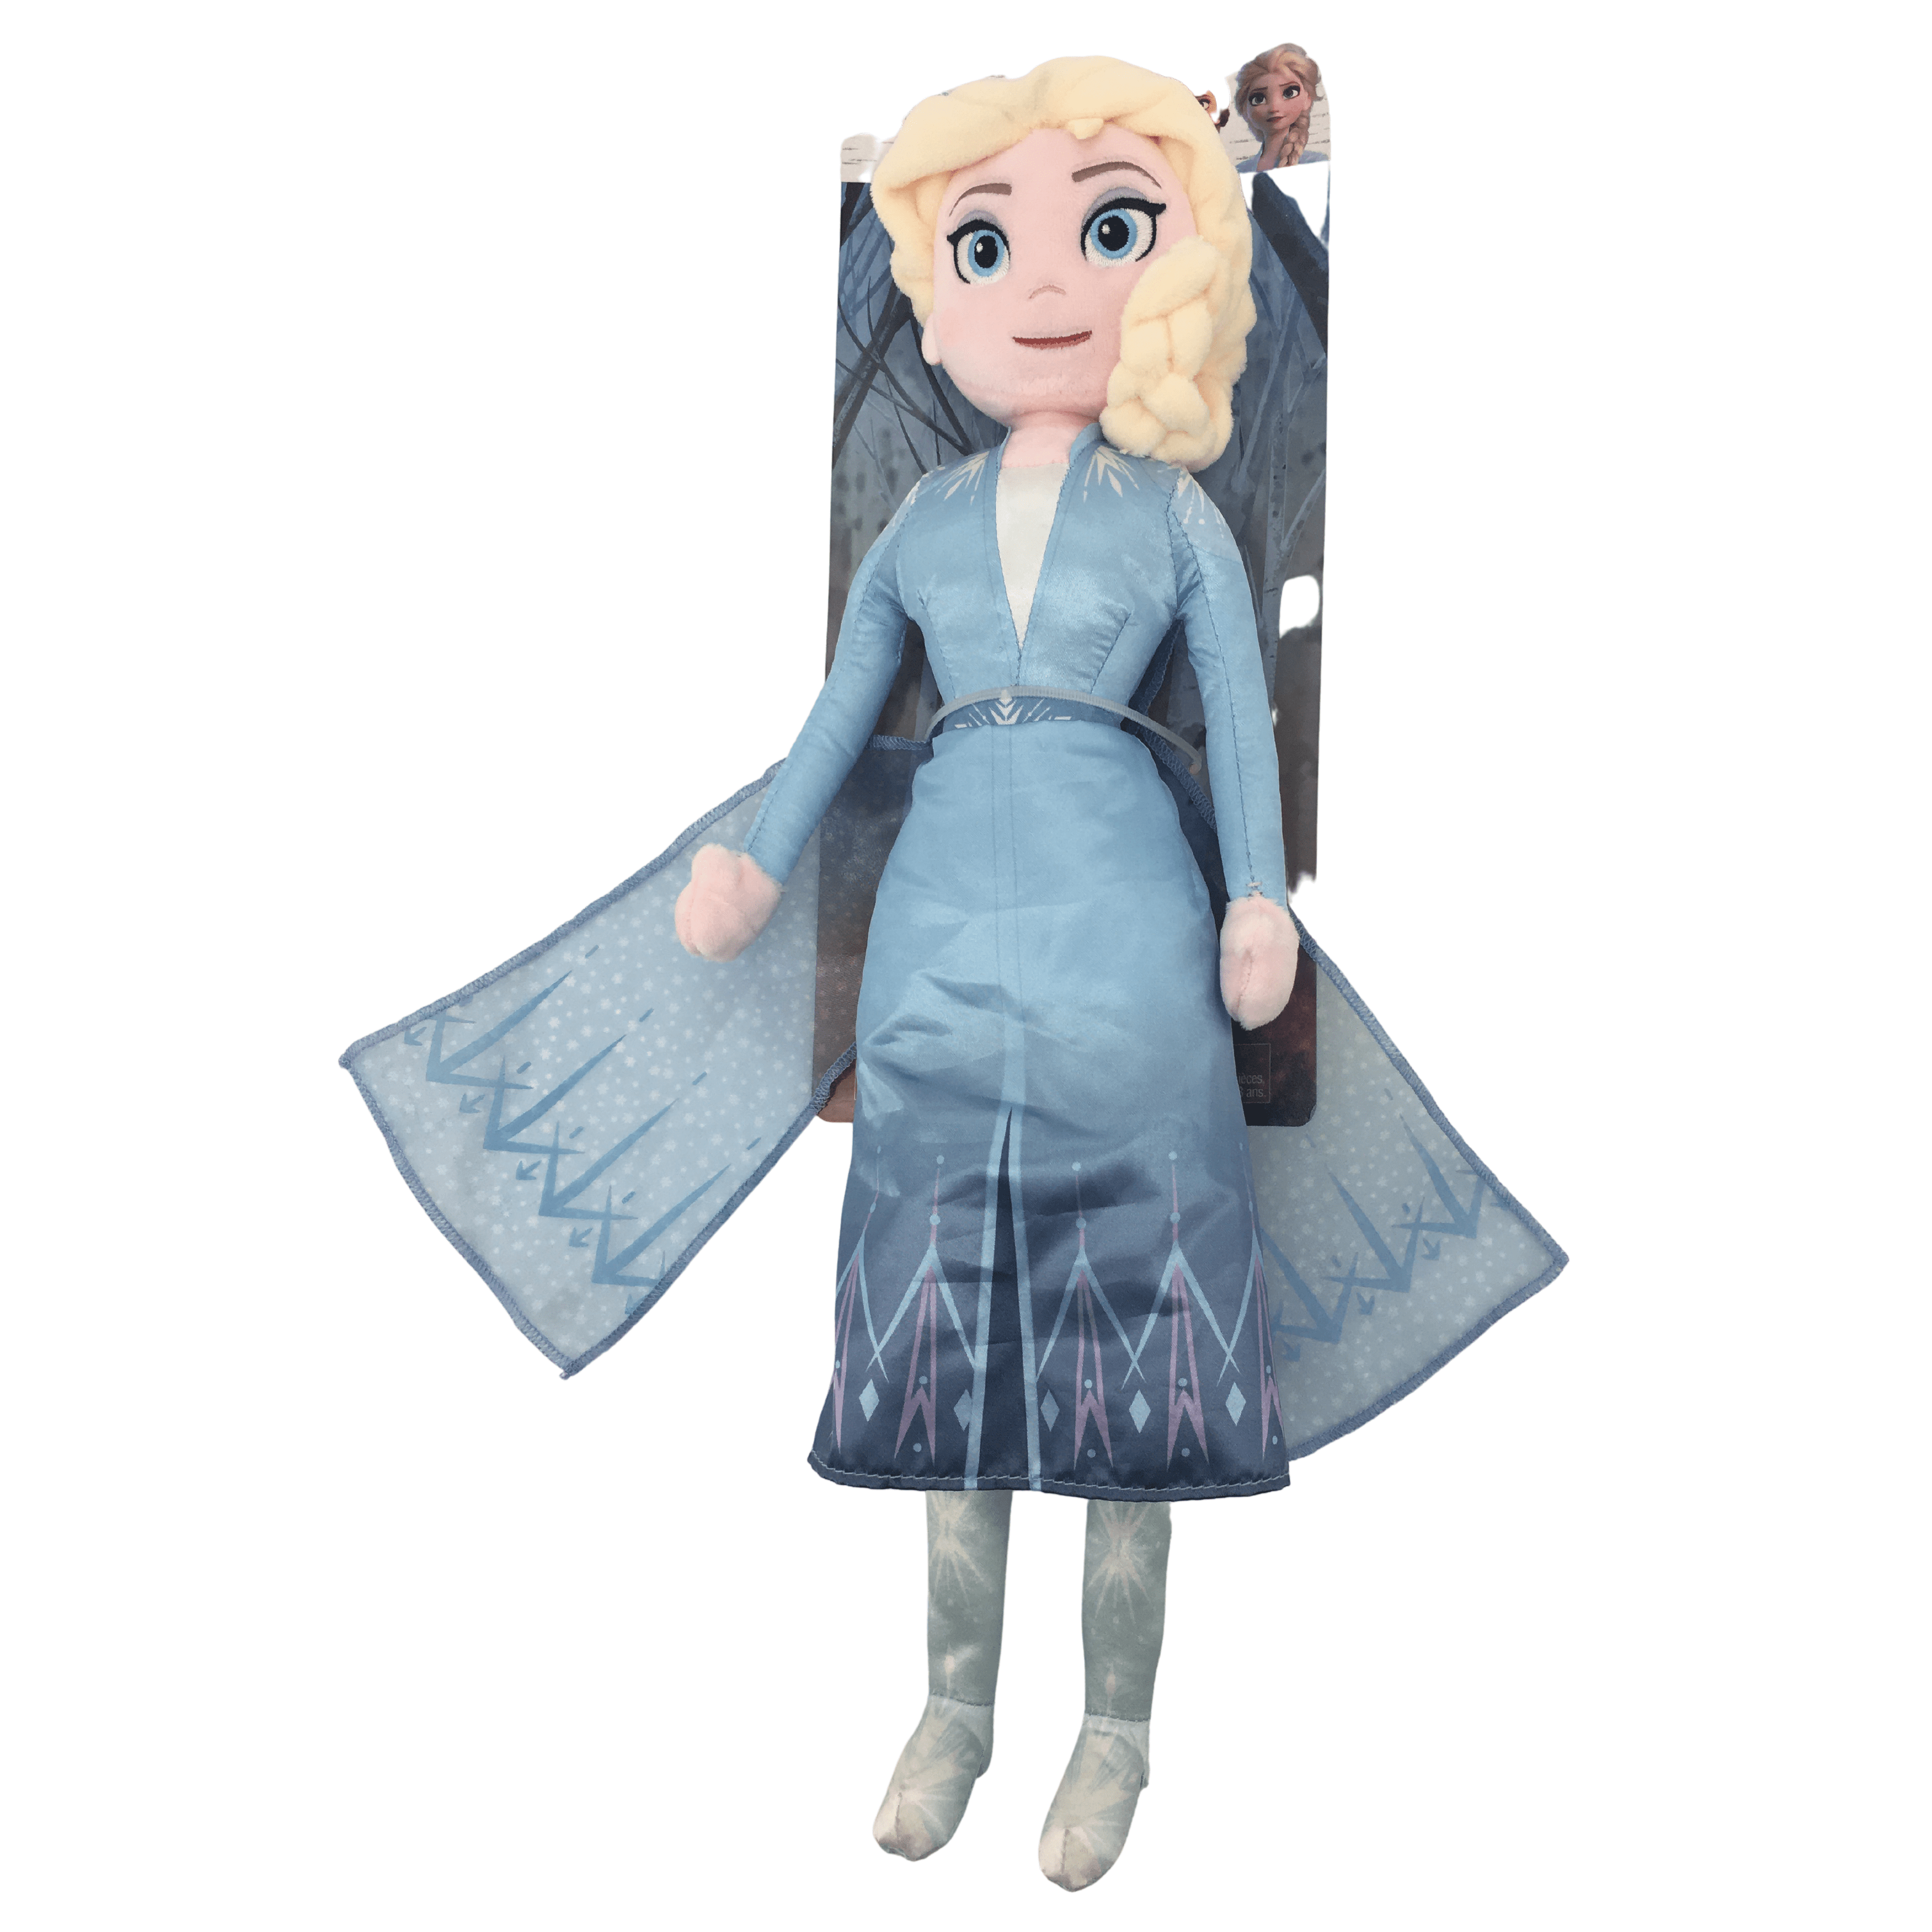 Disney's Frozen 2 Elsa 19 Inch Plush Doll / Official Liscenced Product